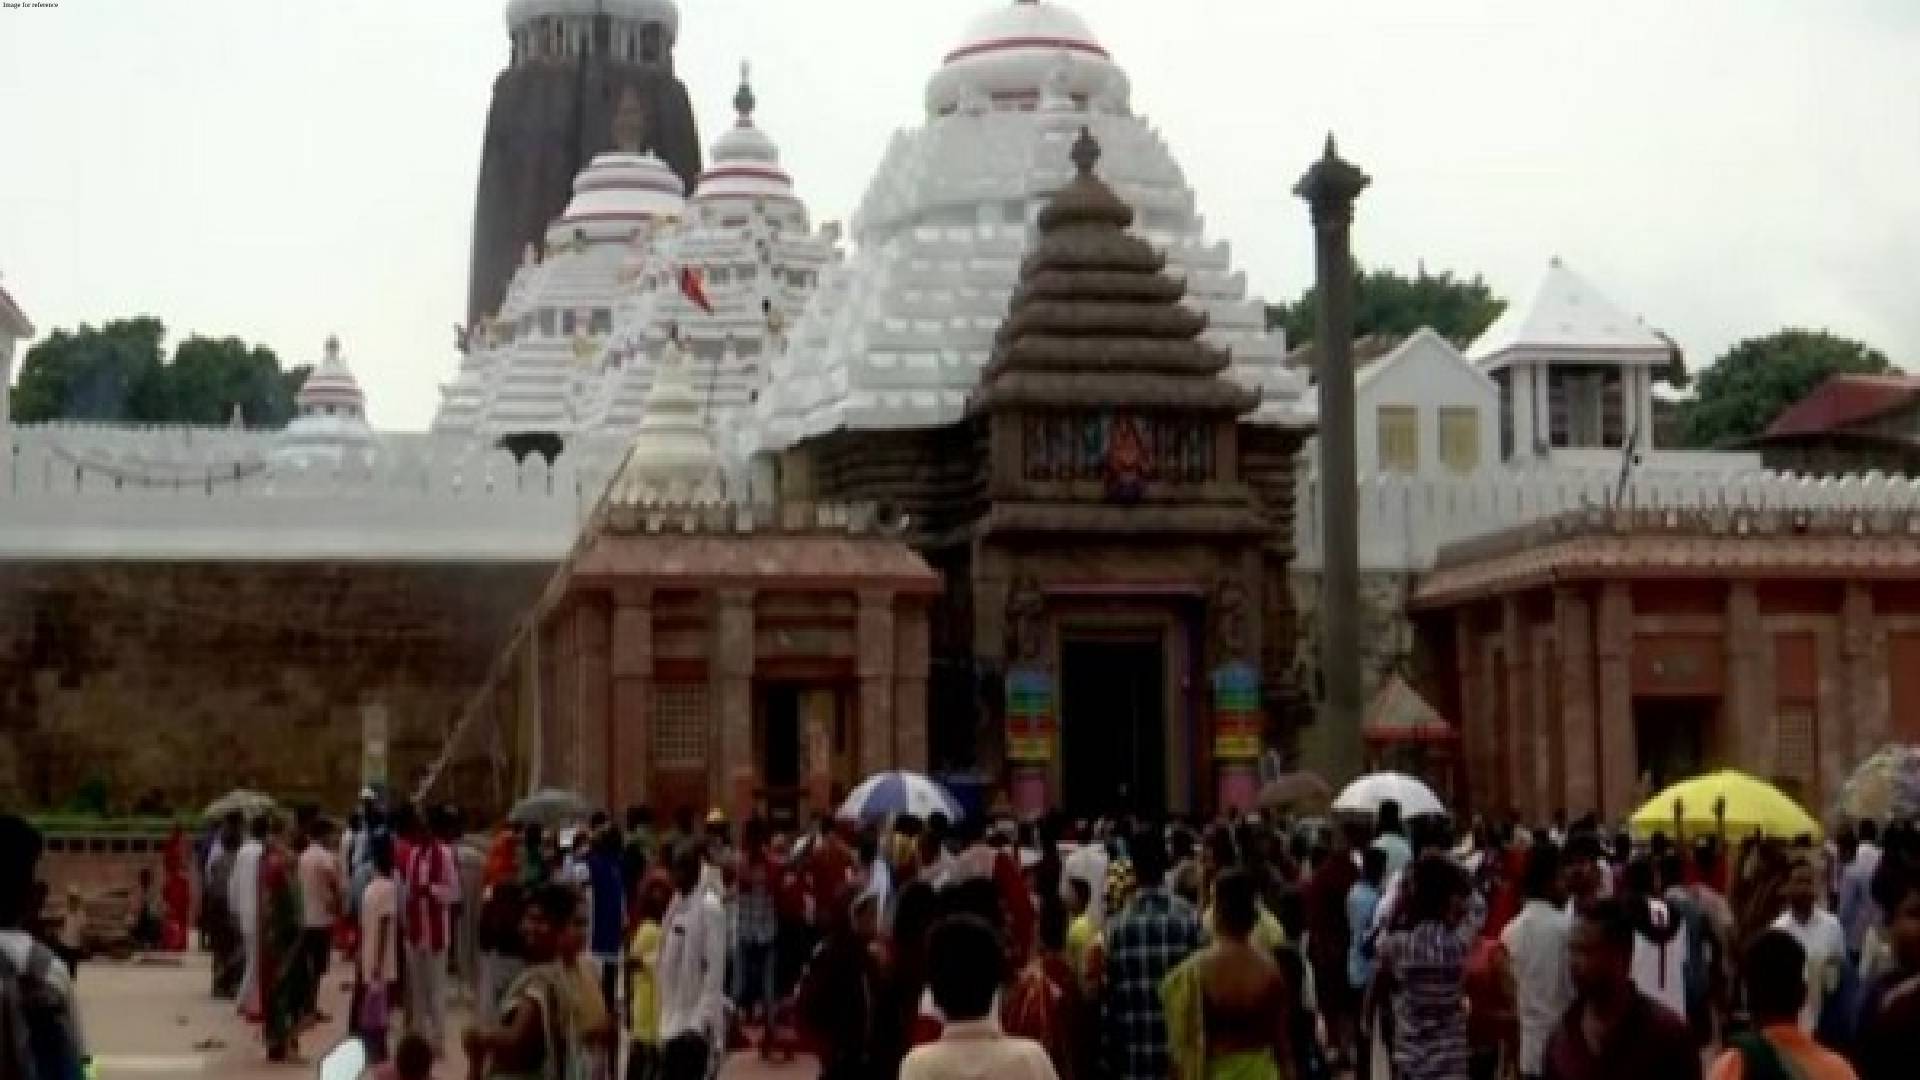 After more than four decades, Ratna Bhandar of Sri Jagannath Temple in Puri re-opens